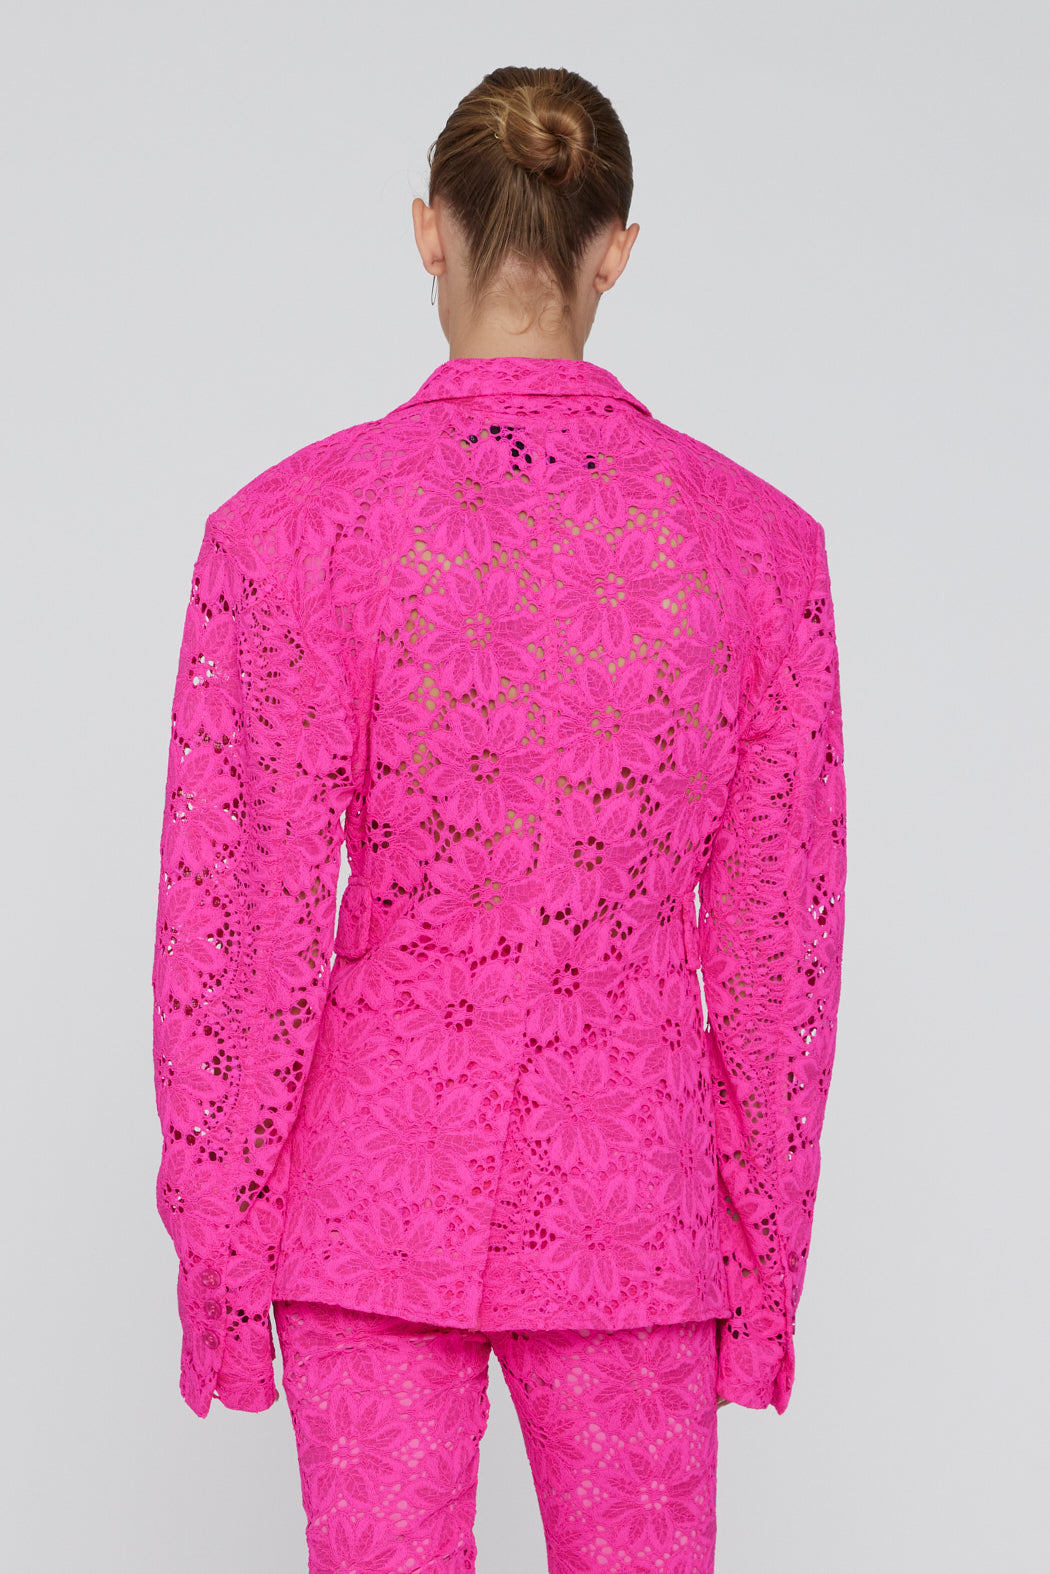 Lace Figure Fitted Blazer, hot pink